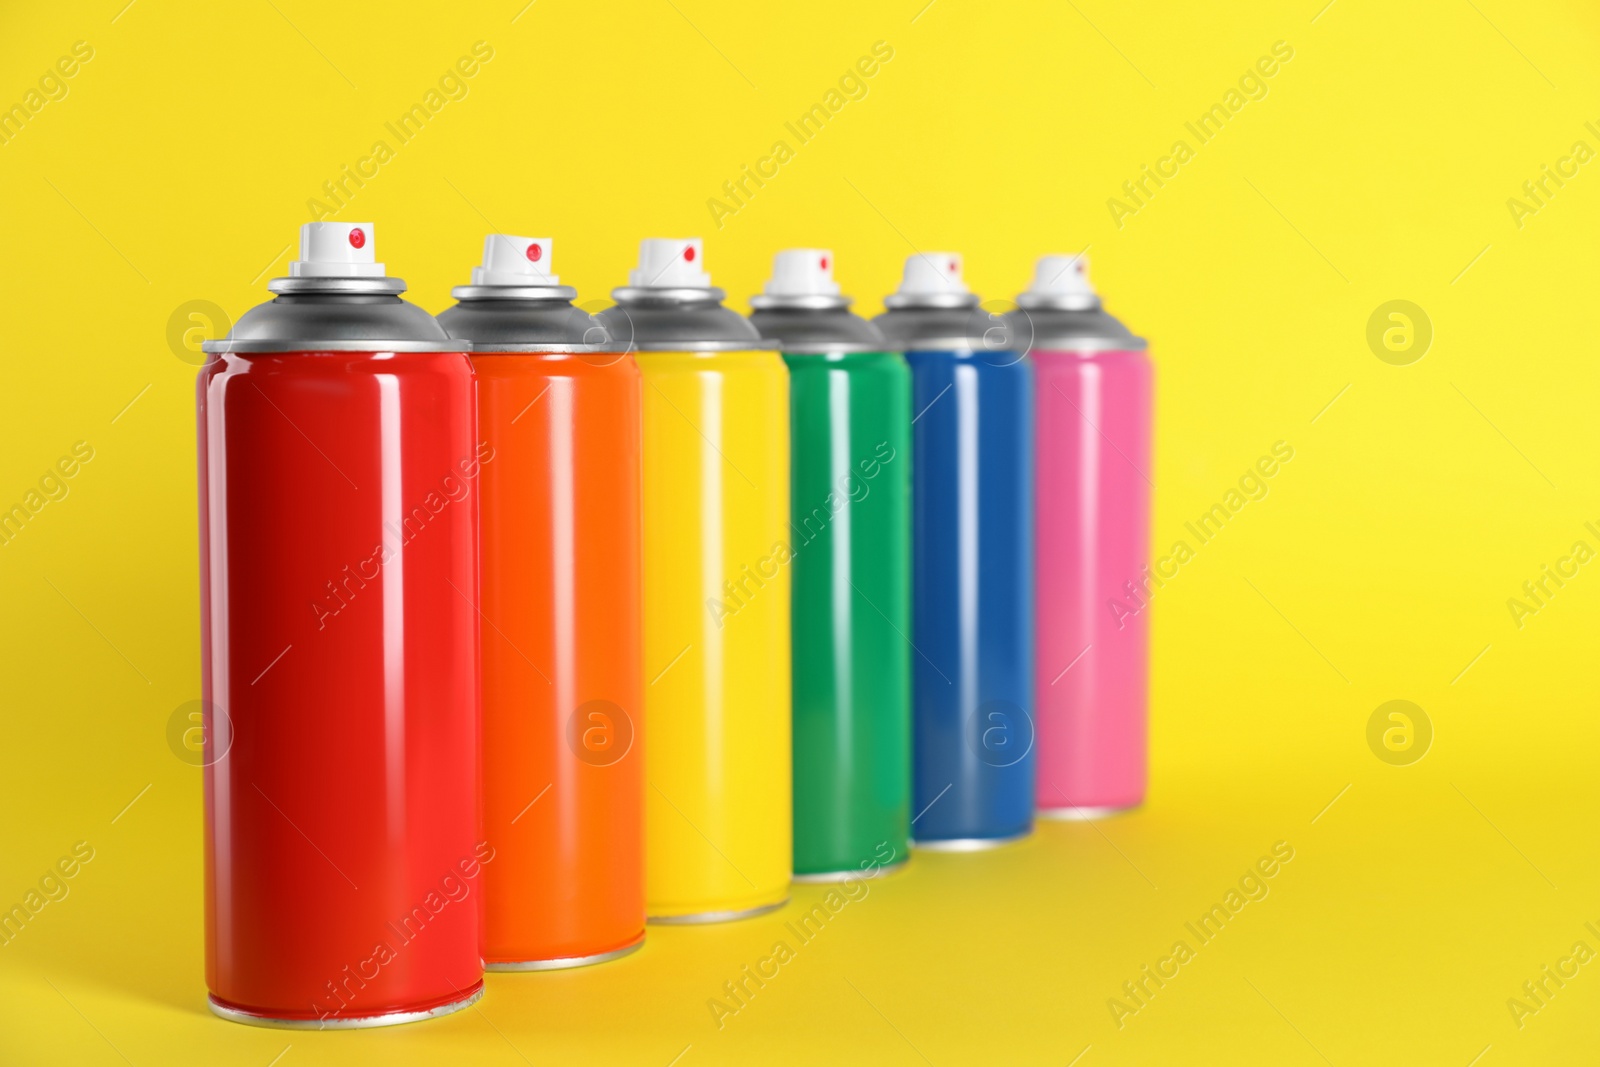 Photo of Colorful cans of spray paints on yellow background